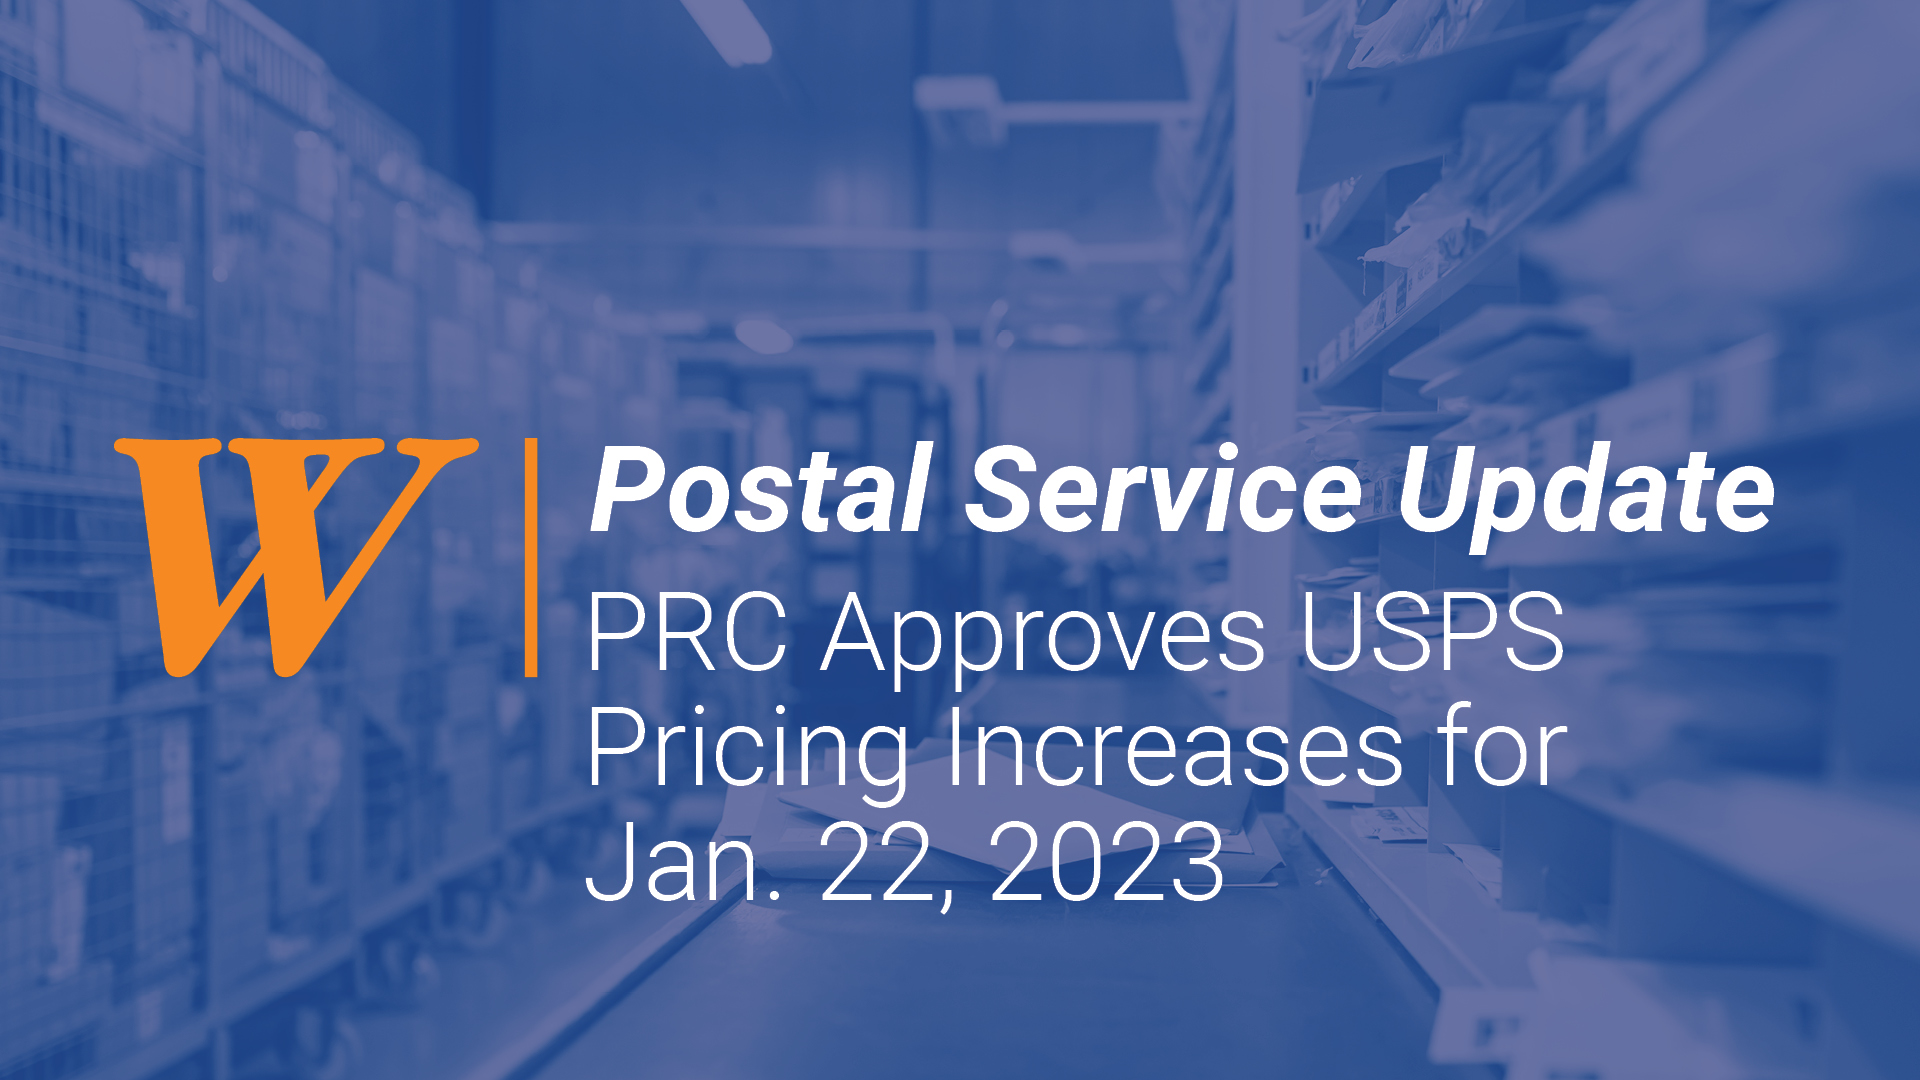 Featured. PRC Approves USPS Pricing Increases for Jan 22 2023